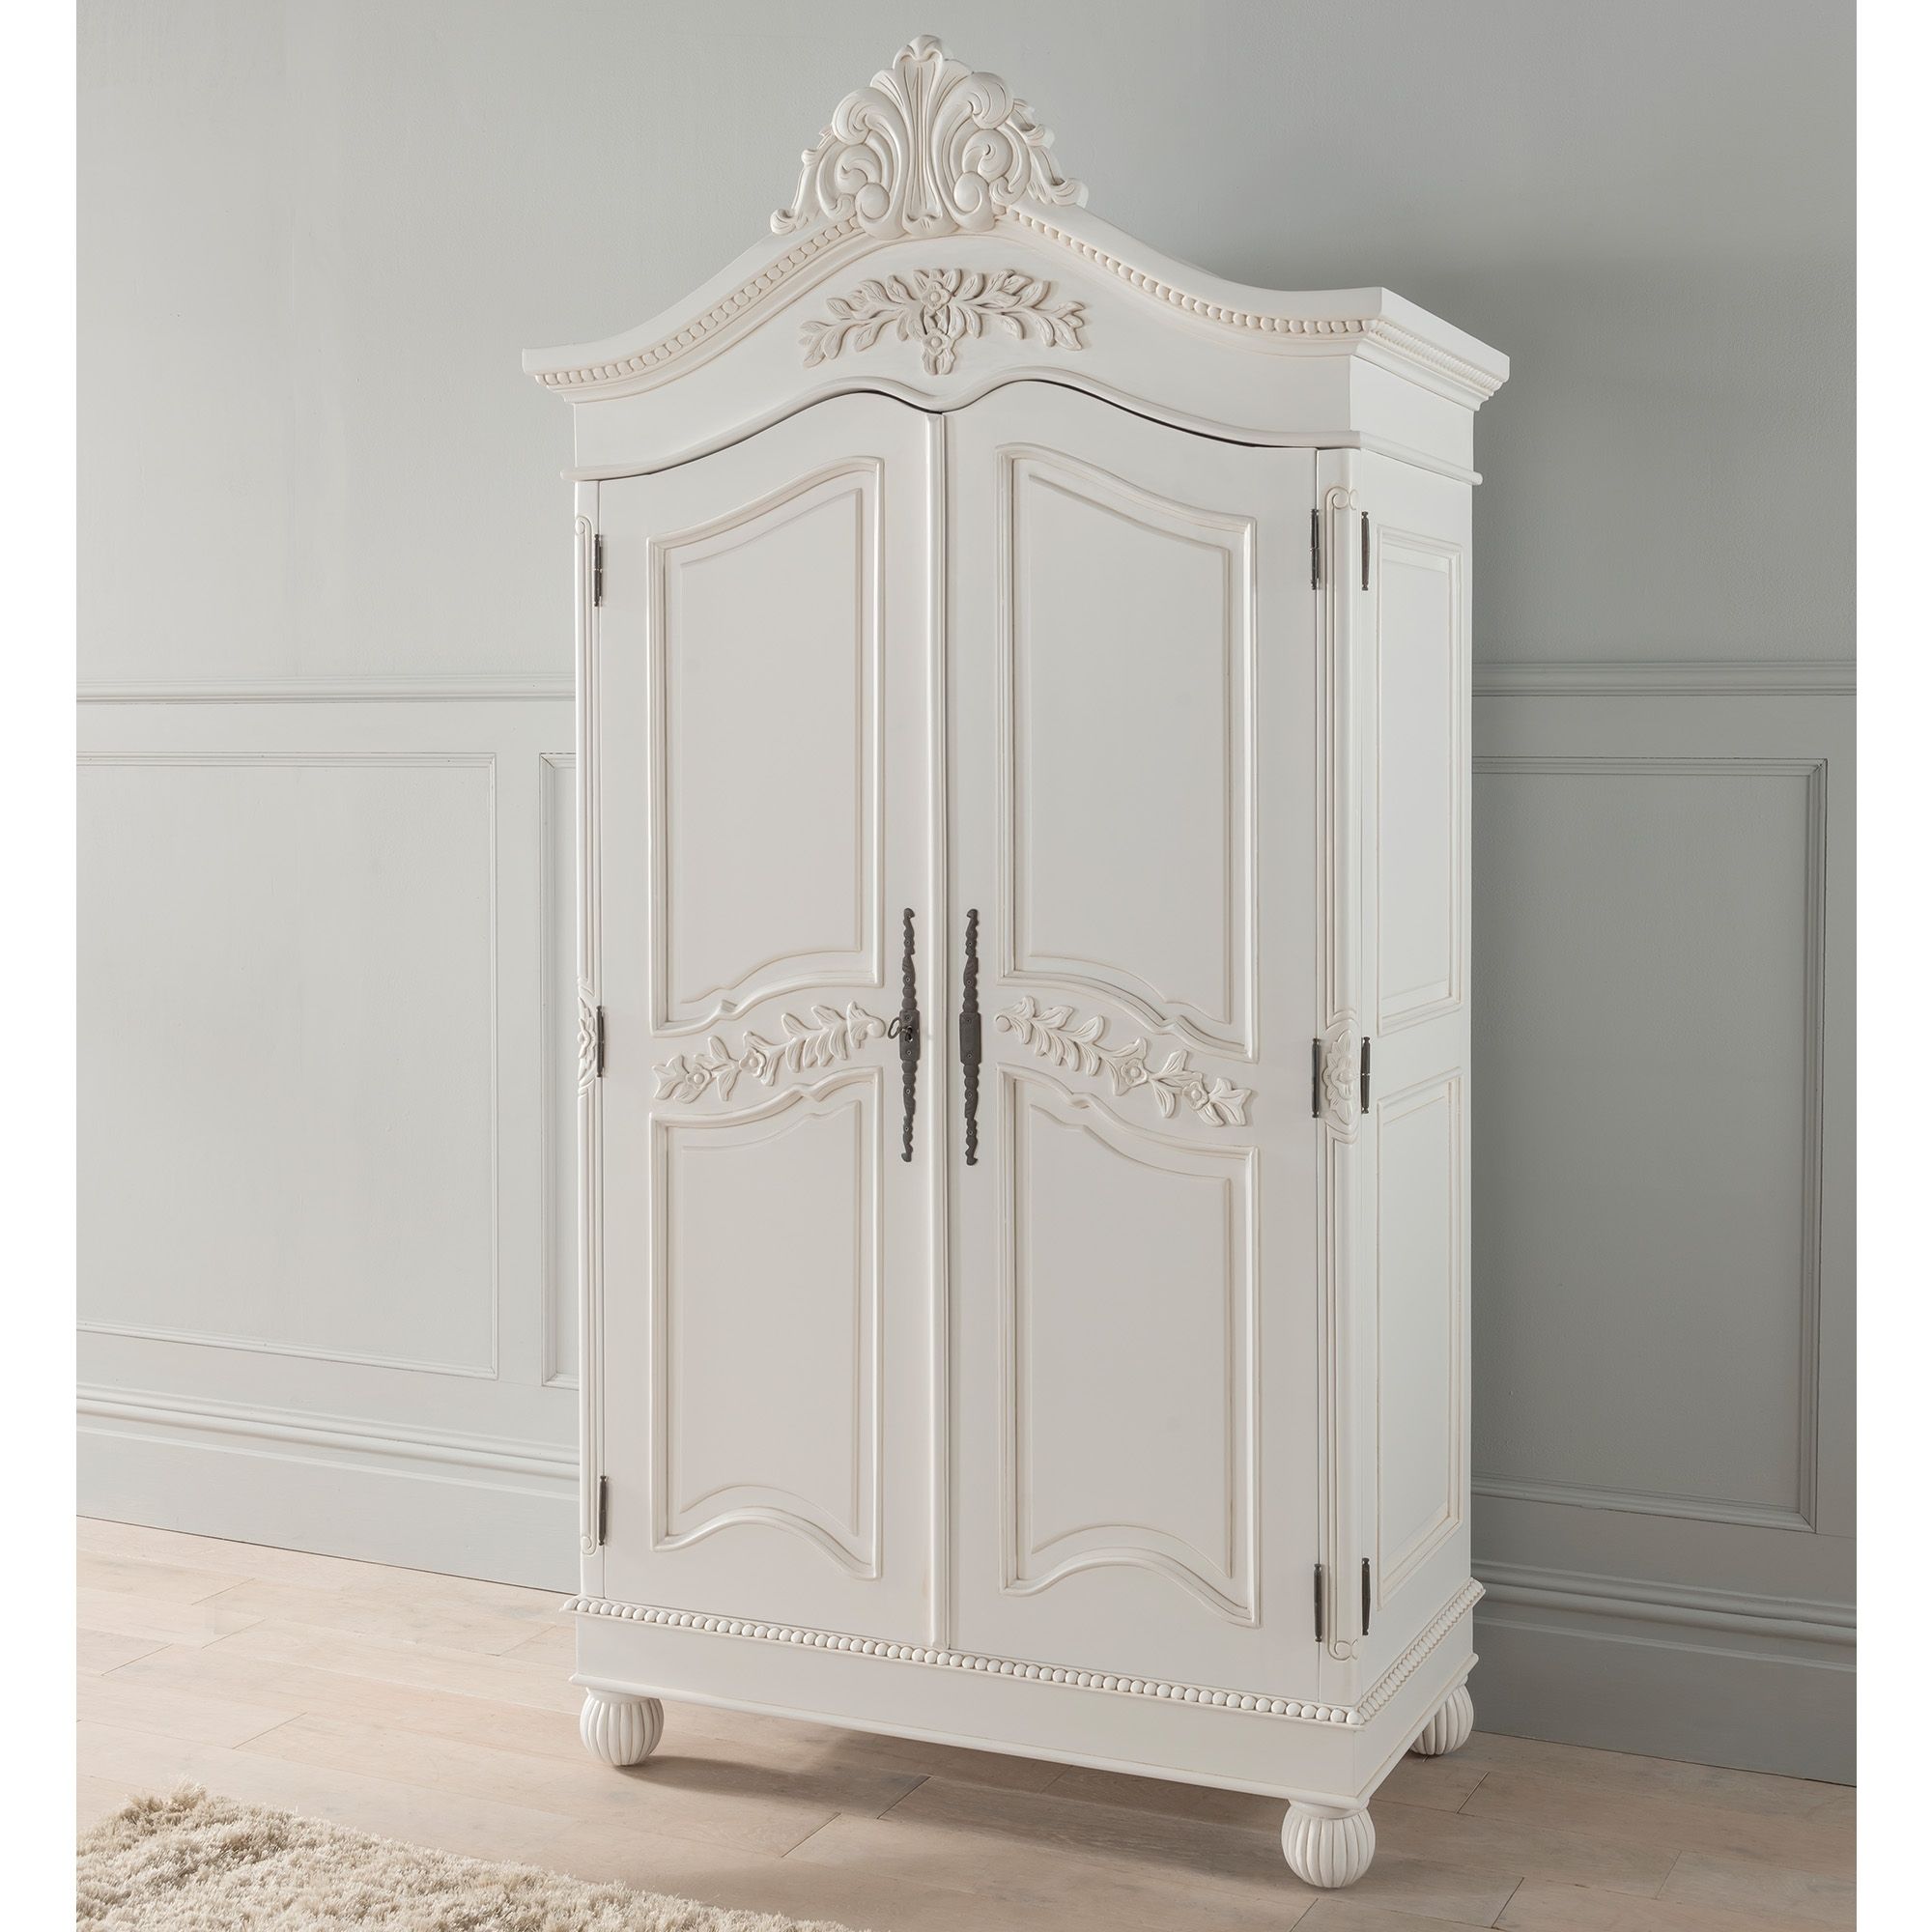 Antique French Style Wardrobe | Shabby Chic Bedroom Furniture Within White Shabby Chic Wardrobes (Photo 13 of 15)